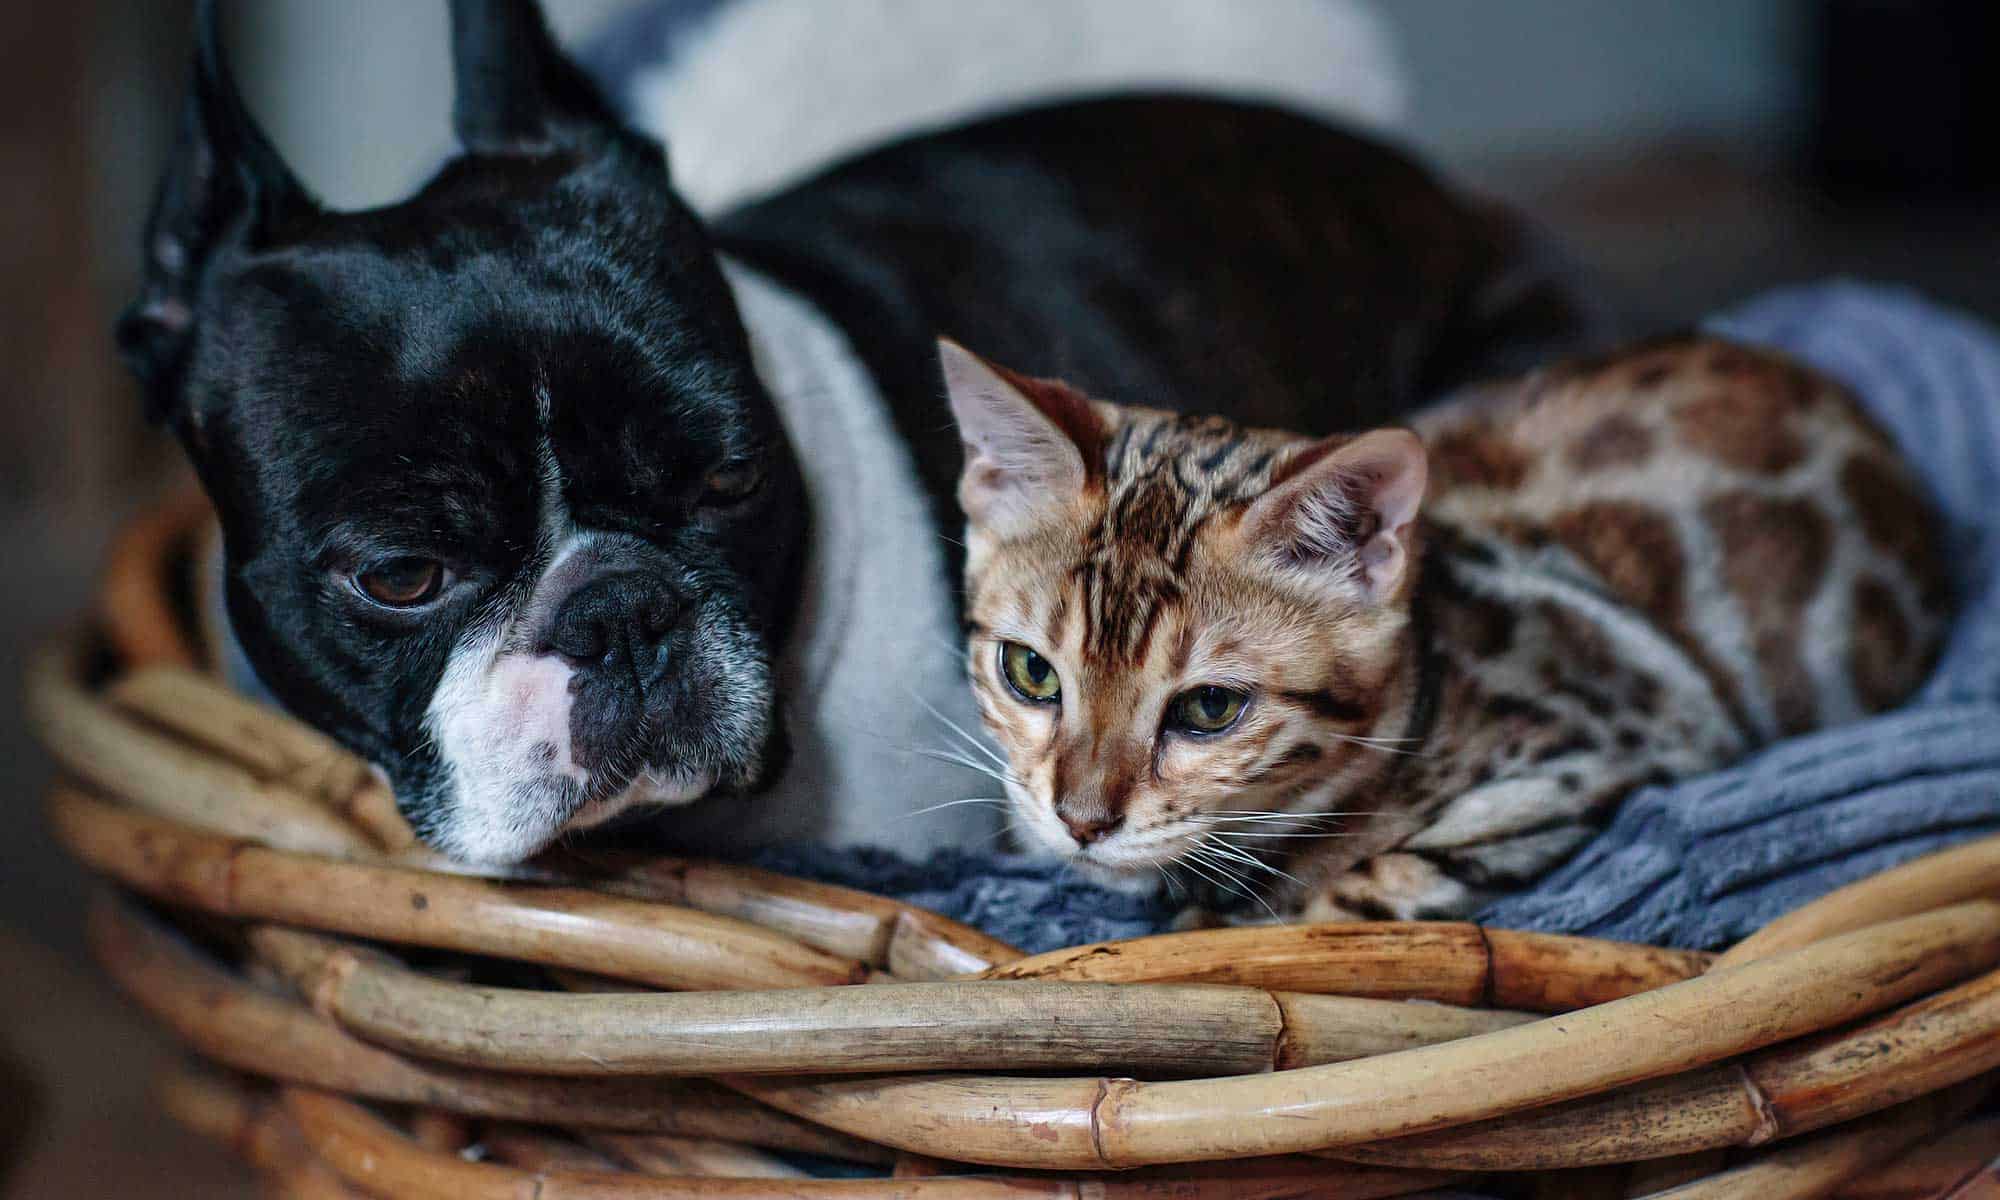 A dog and cat laying in a basket